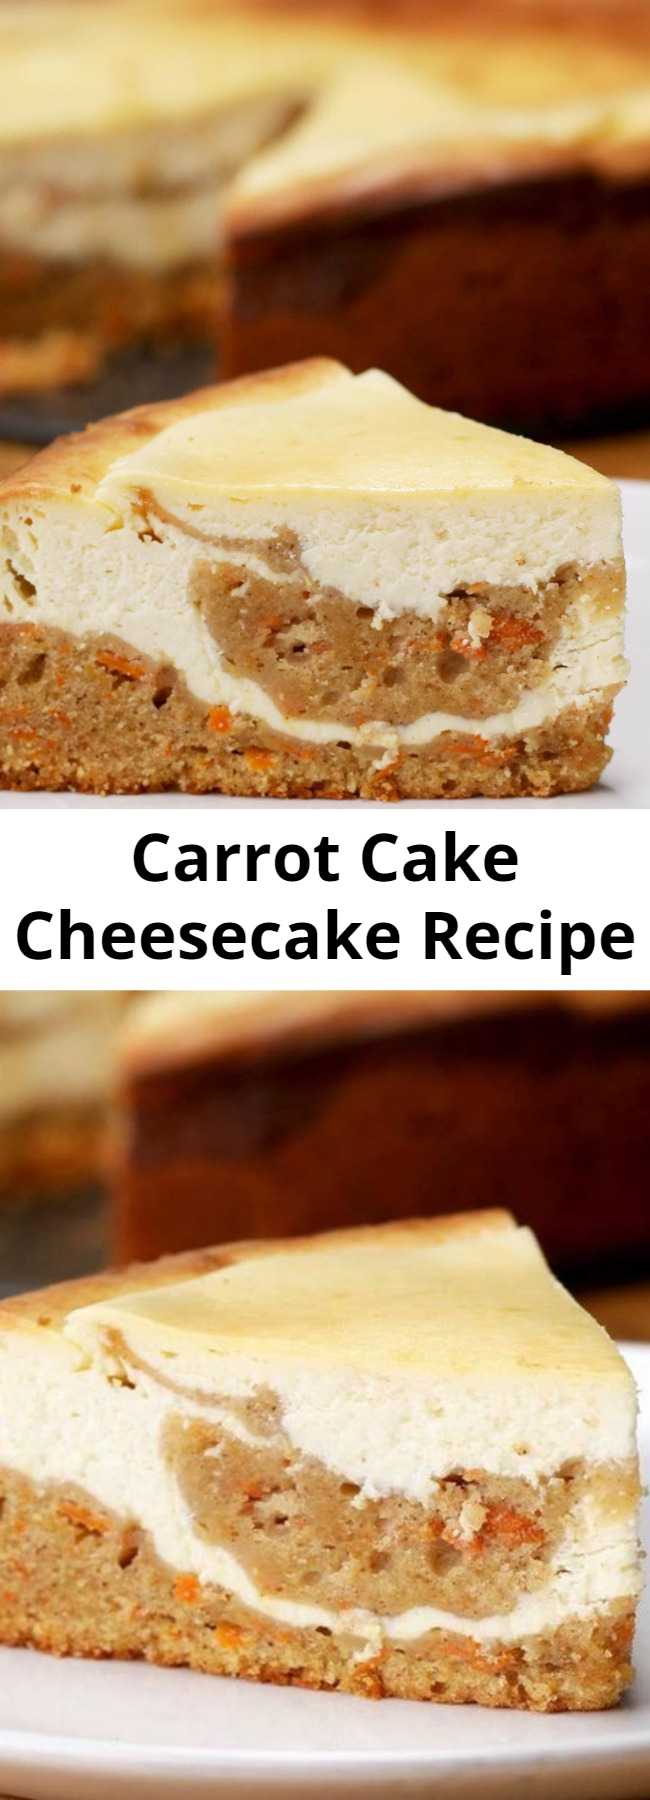 Carrot Cake Cheesecake Recipe - Two of my favorite cakes come together to make the ultimate spring dessert, this decadent carrot cake cheesecake. If you like carrot cake or cheesecake, you have to try this one! It’s an elegant dessert that is certain to impress. It would be perfect to make for Easter or an upcoming birthday. Really, who wouldn’t love this?